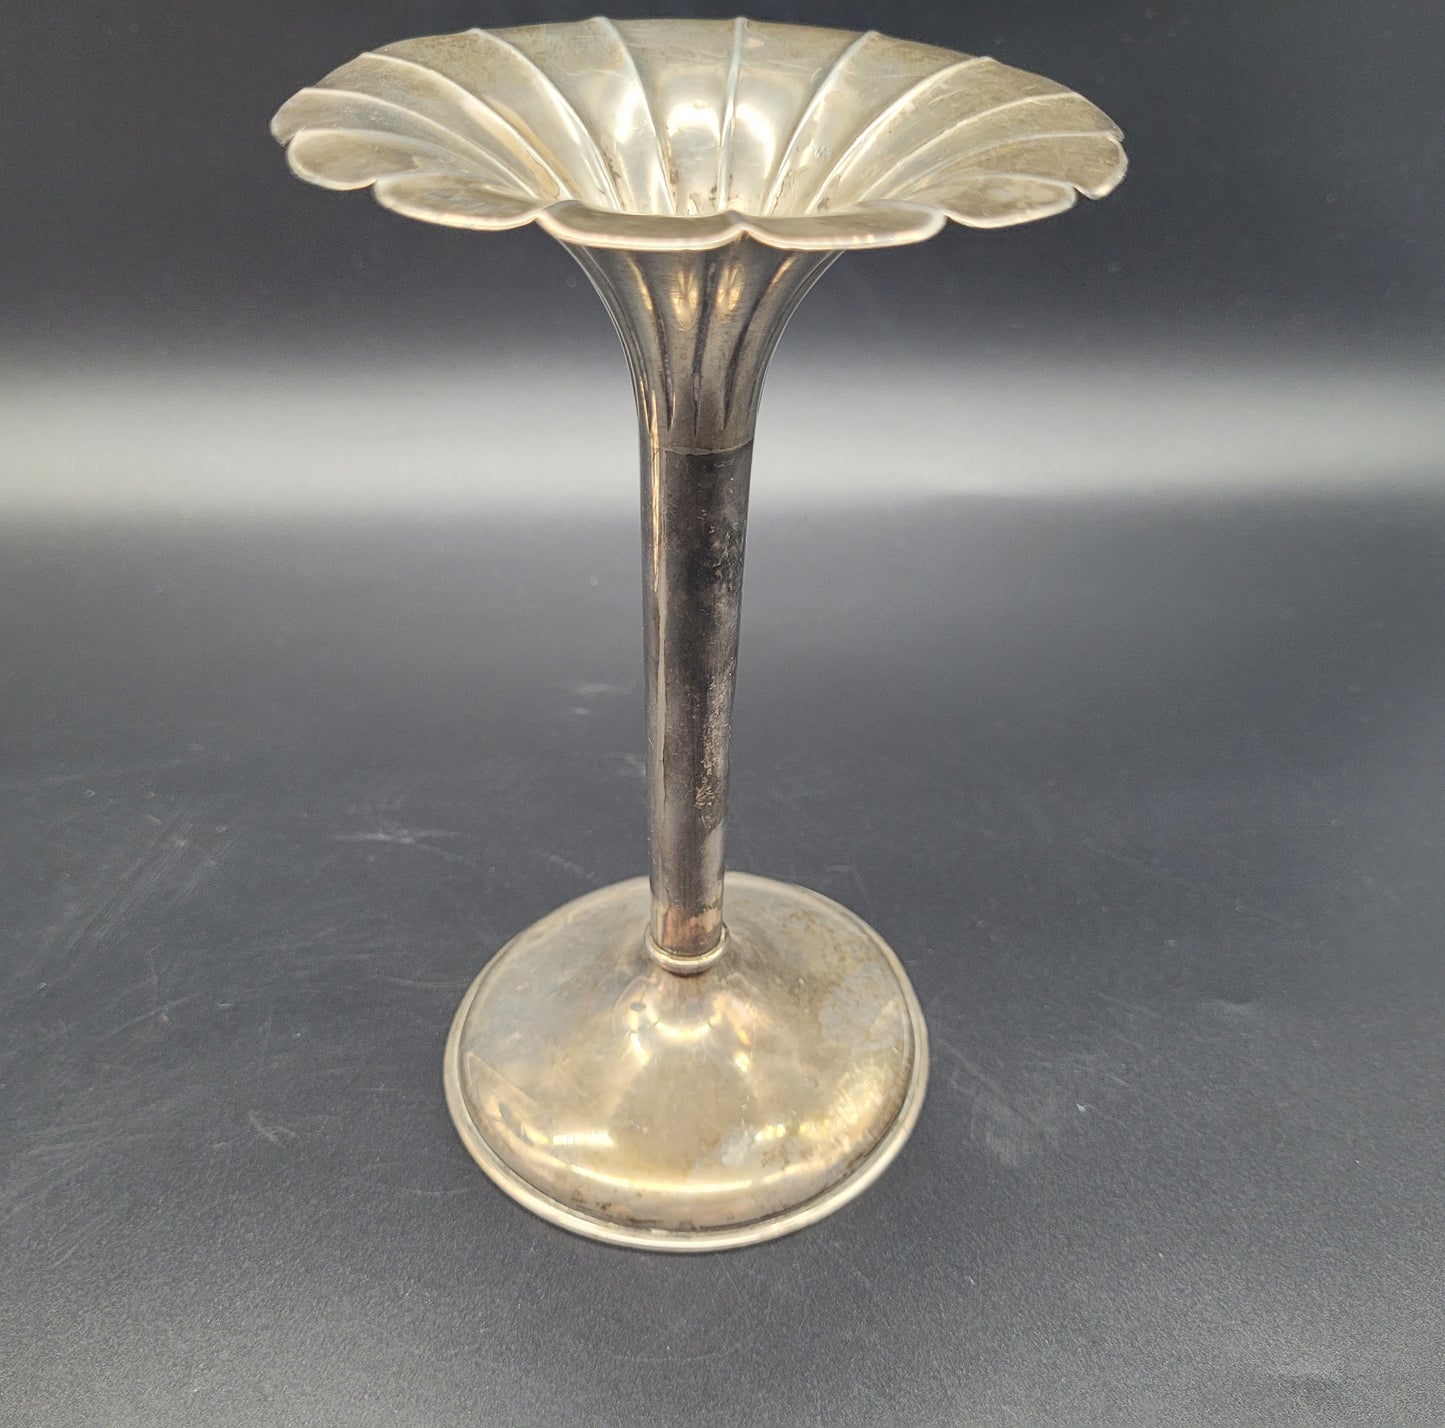 ANTIQUE SILVER UK A very nice pair of sterling silver tulip posy vases, each set with fanned rims and graduated bases. With an inscription relating to a golfing competition. 